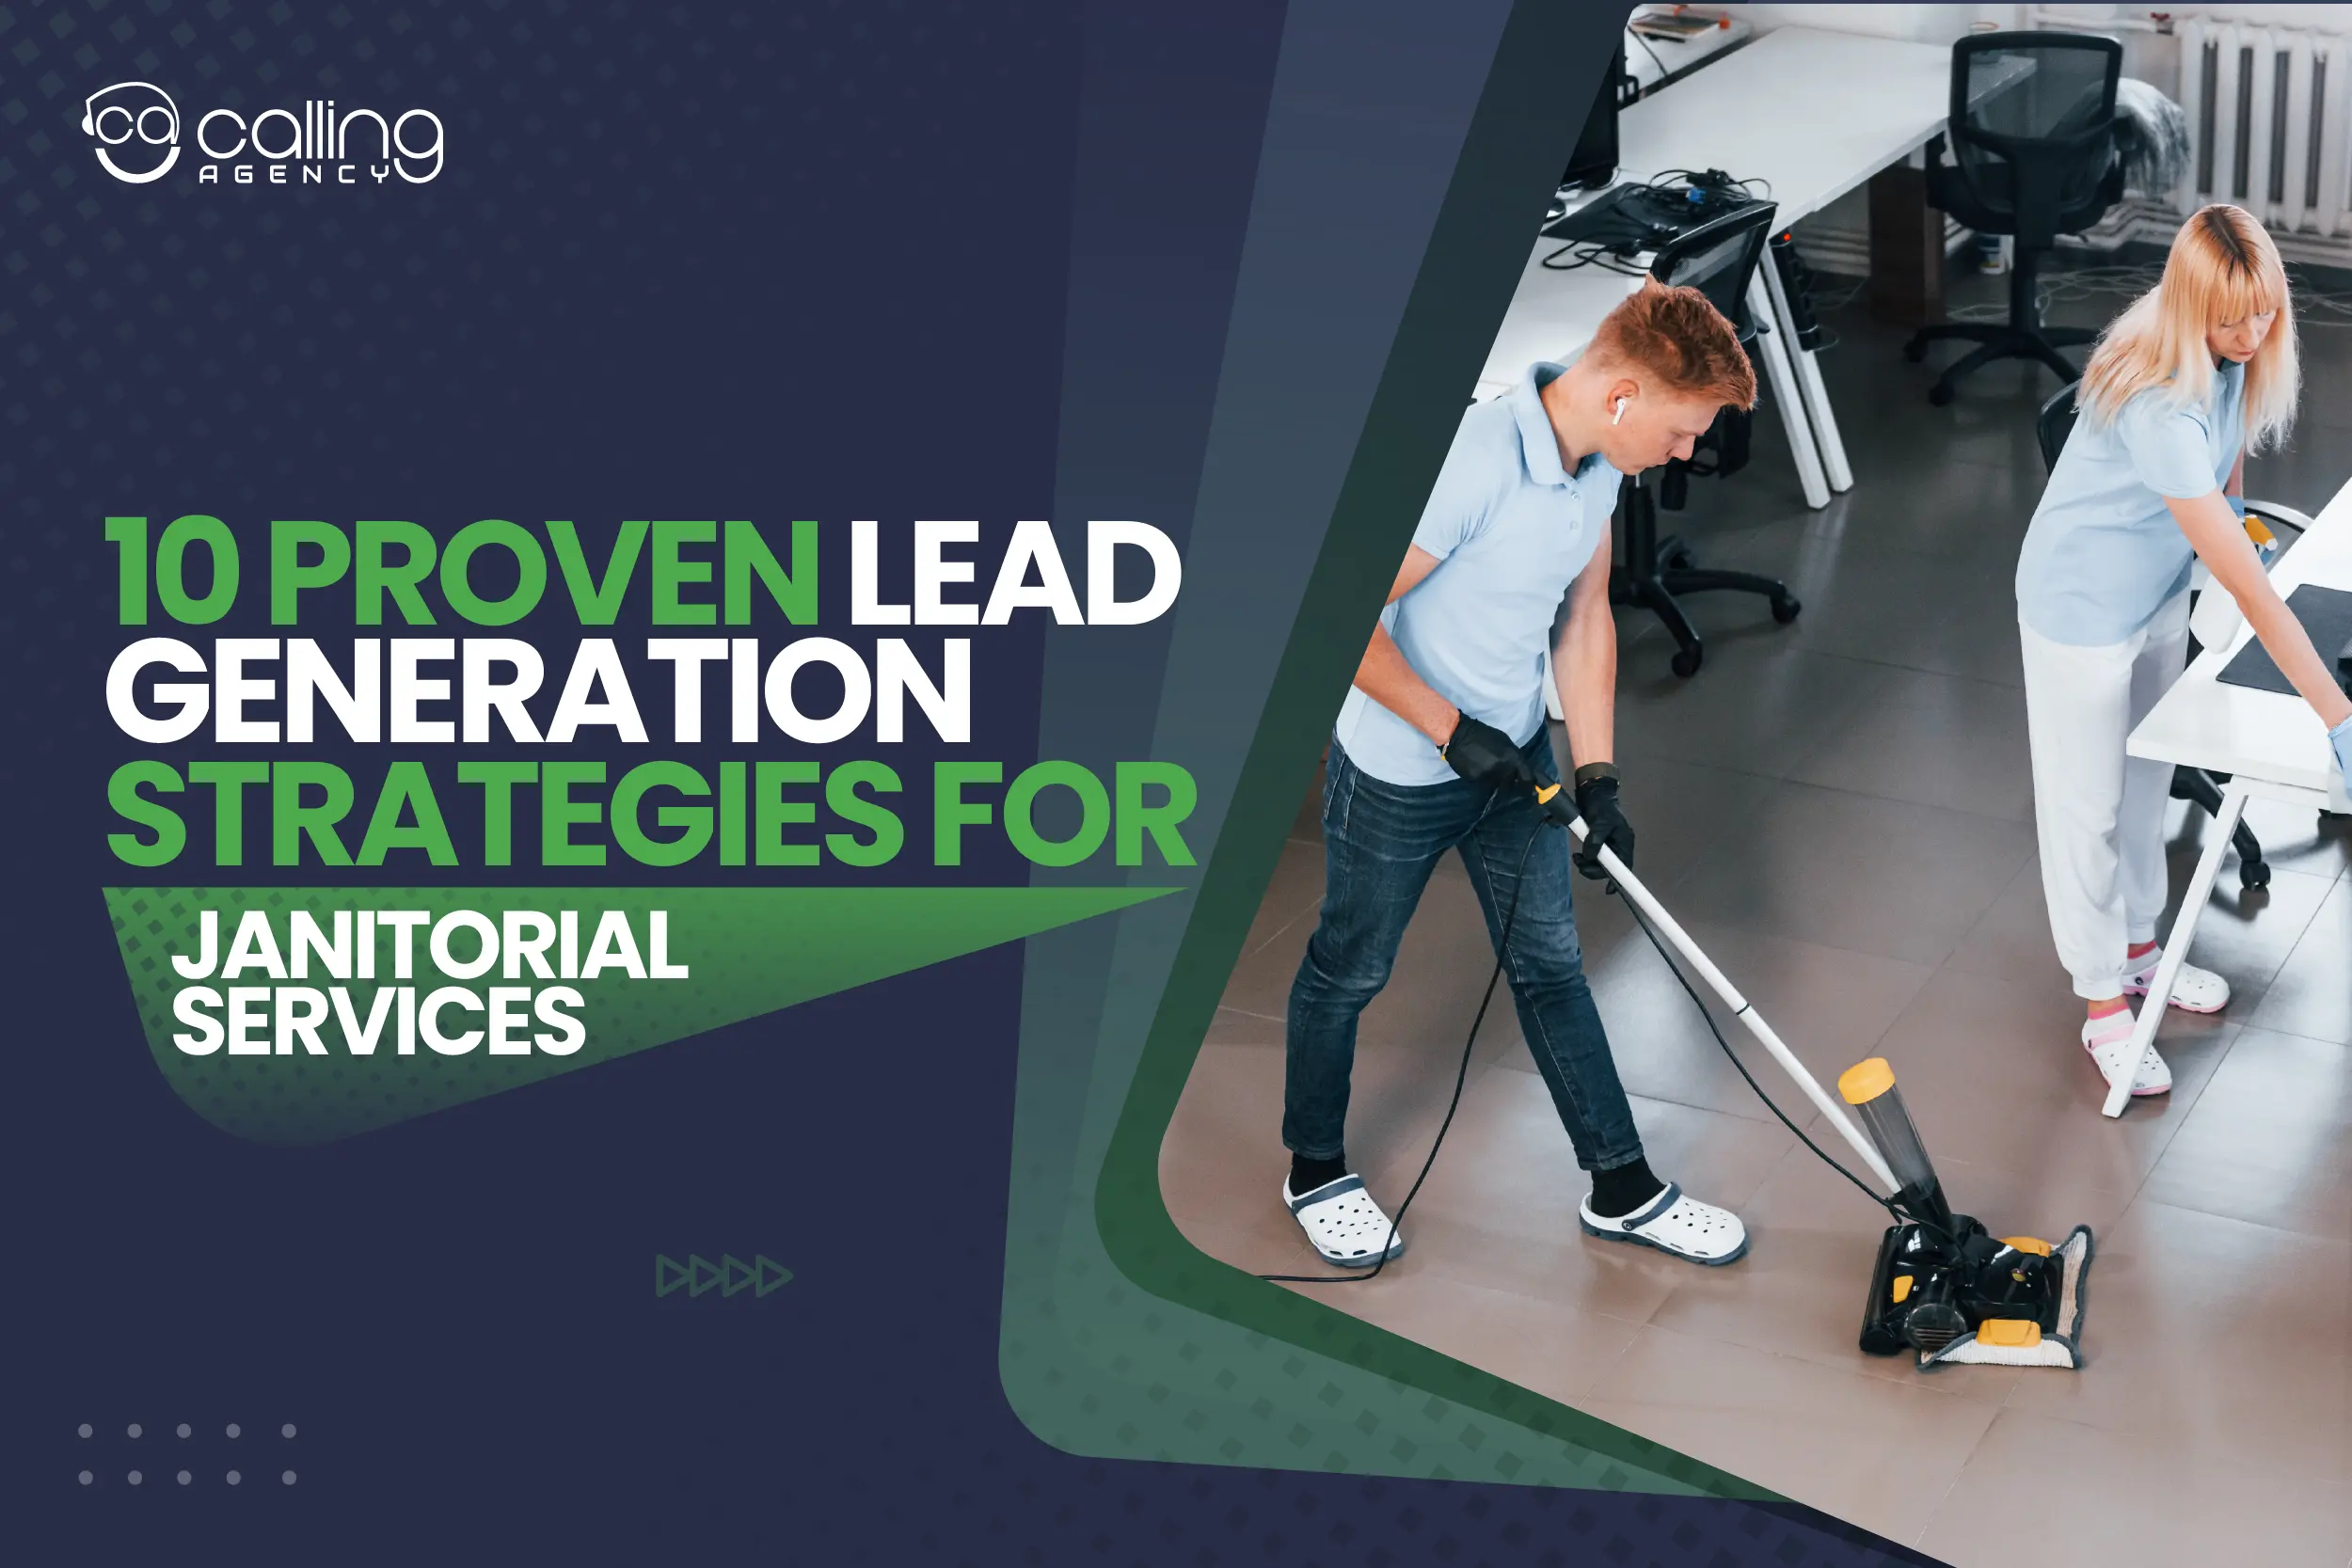 10 Proven Lead Generation Strategies for Janitorial Services